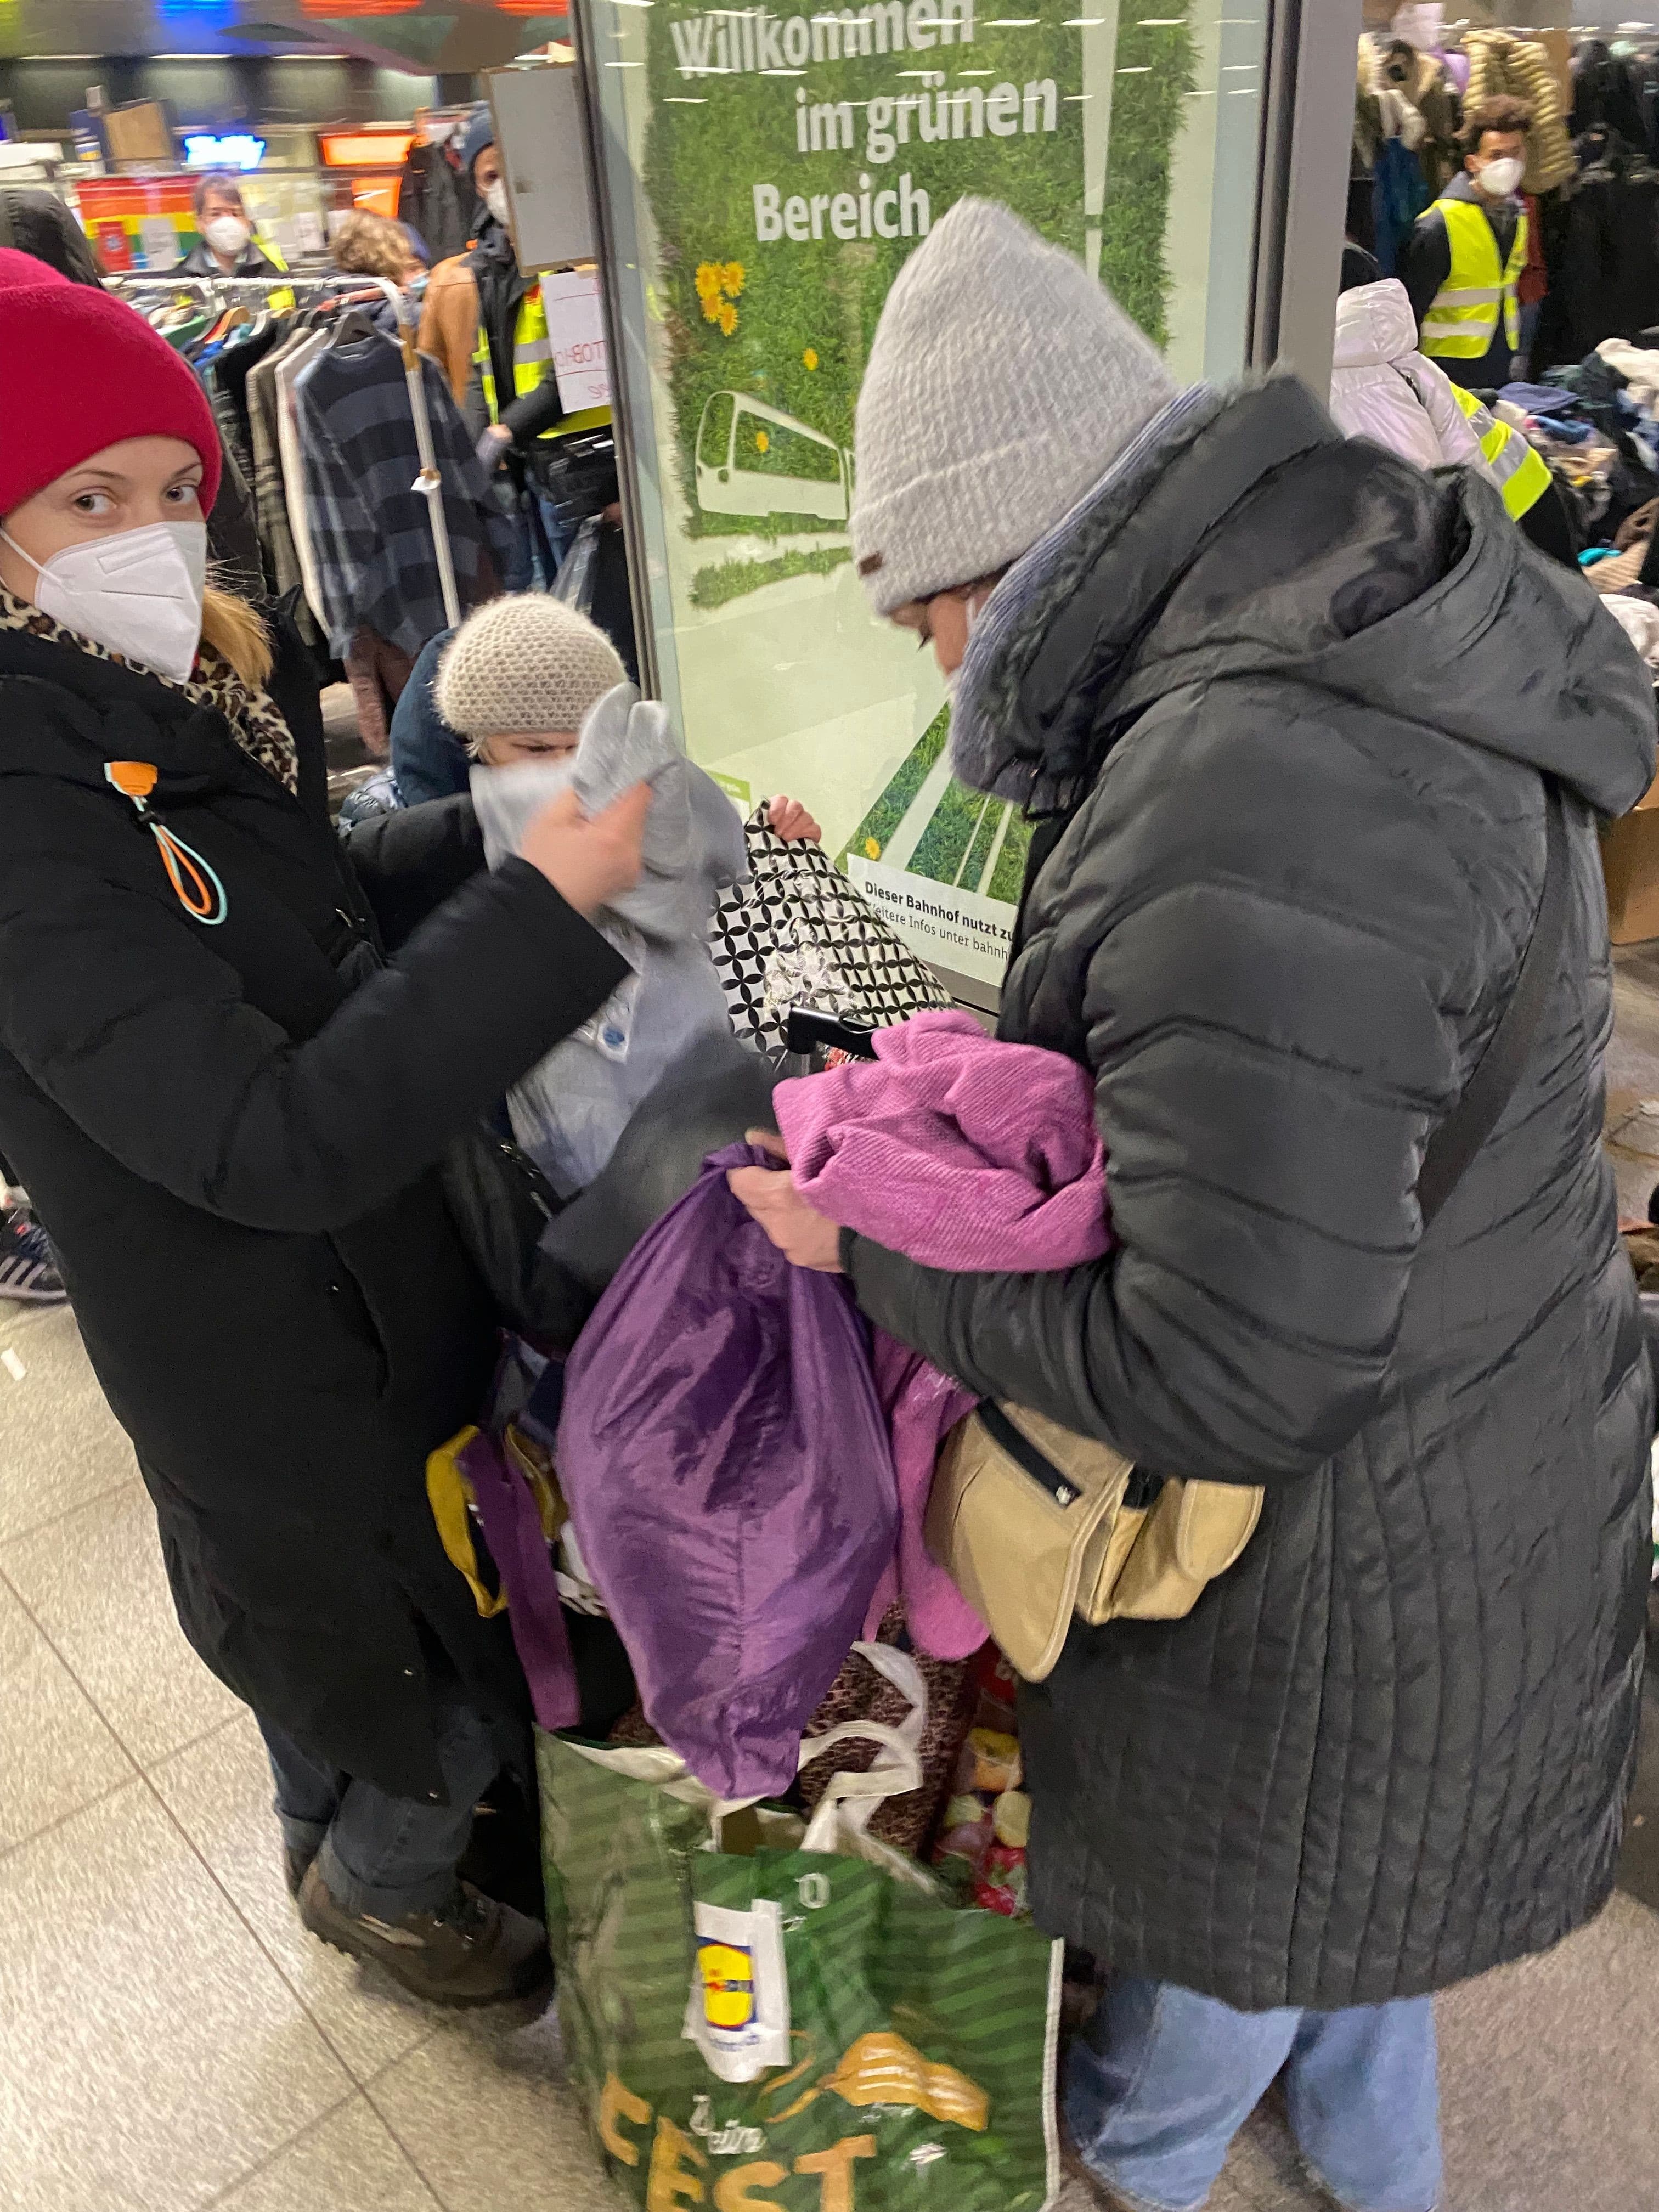 Looking for clothing for their children after having just arrived from Ukraine and having left everything behind.  Starting a new  life in a foreign country.